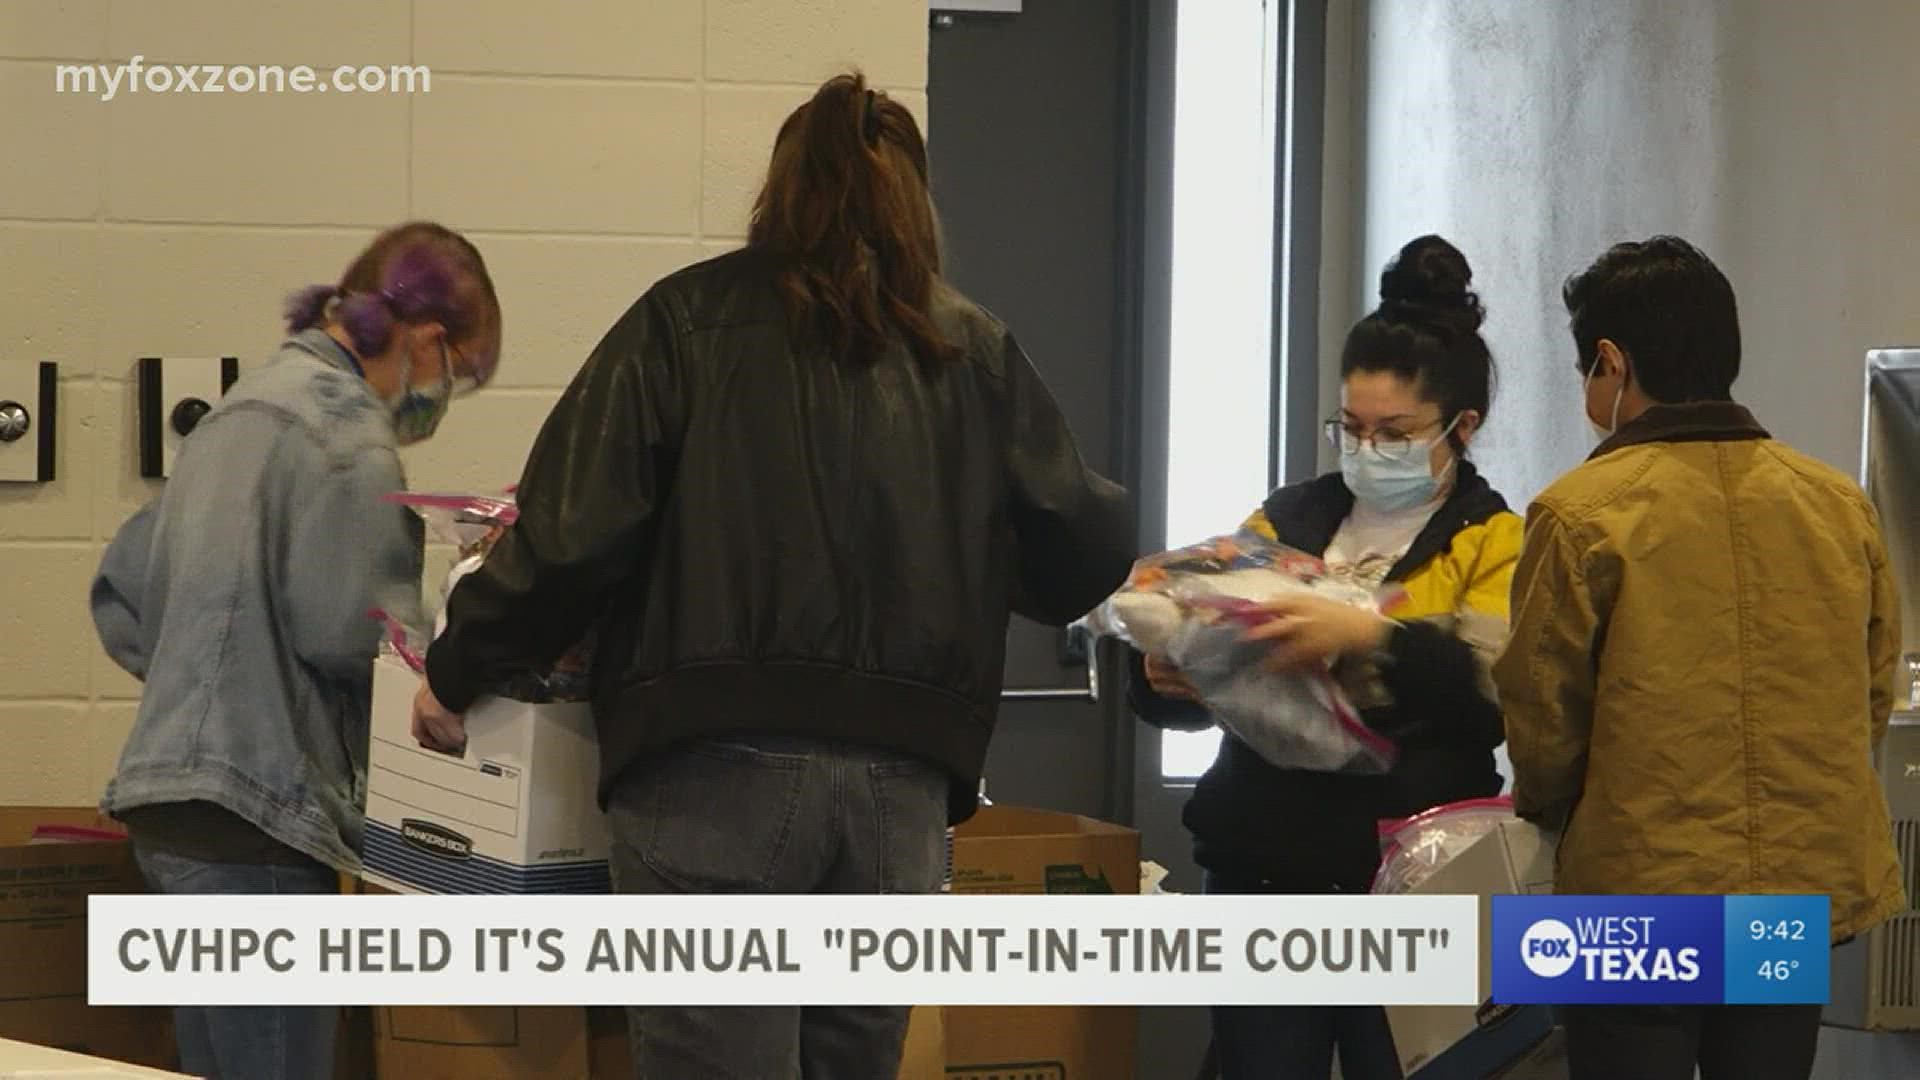 The Concho Valley Homeless Planning Coalition along with volunteers teamed up for a "Point-in-Time count".